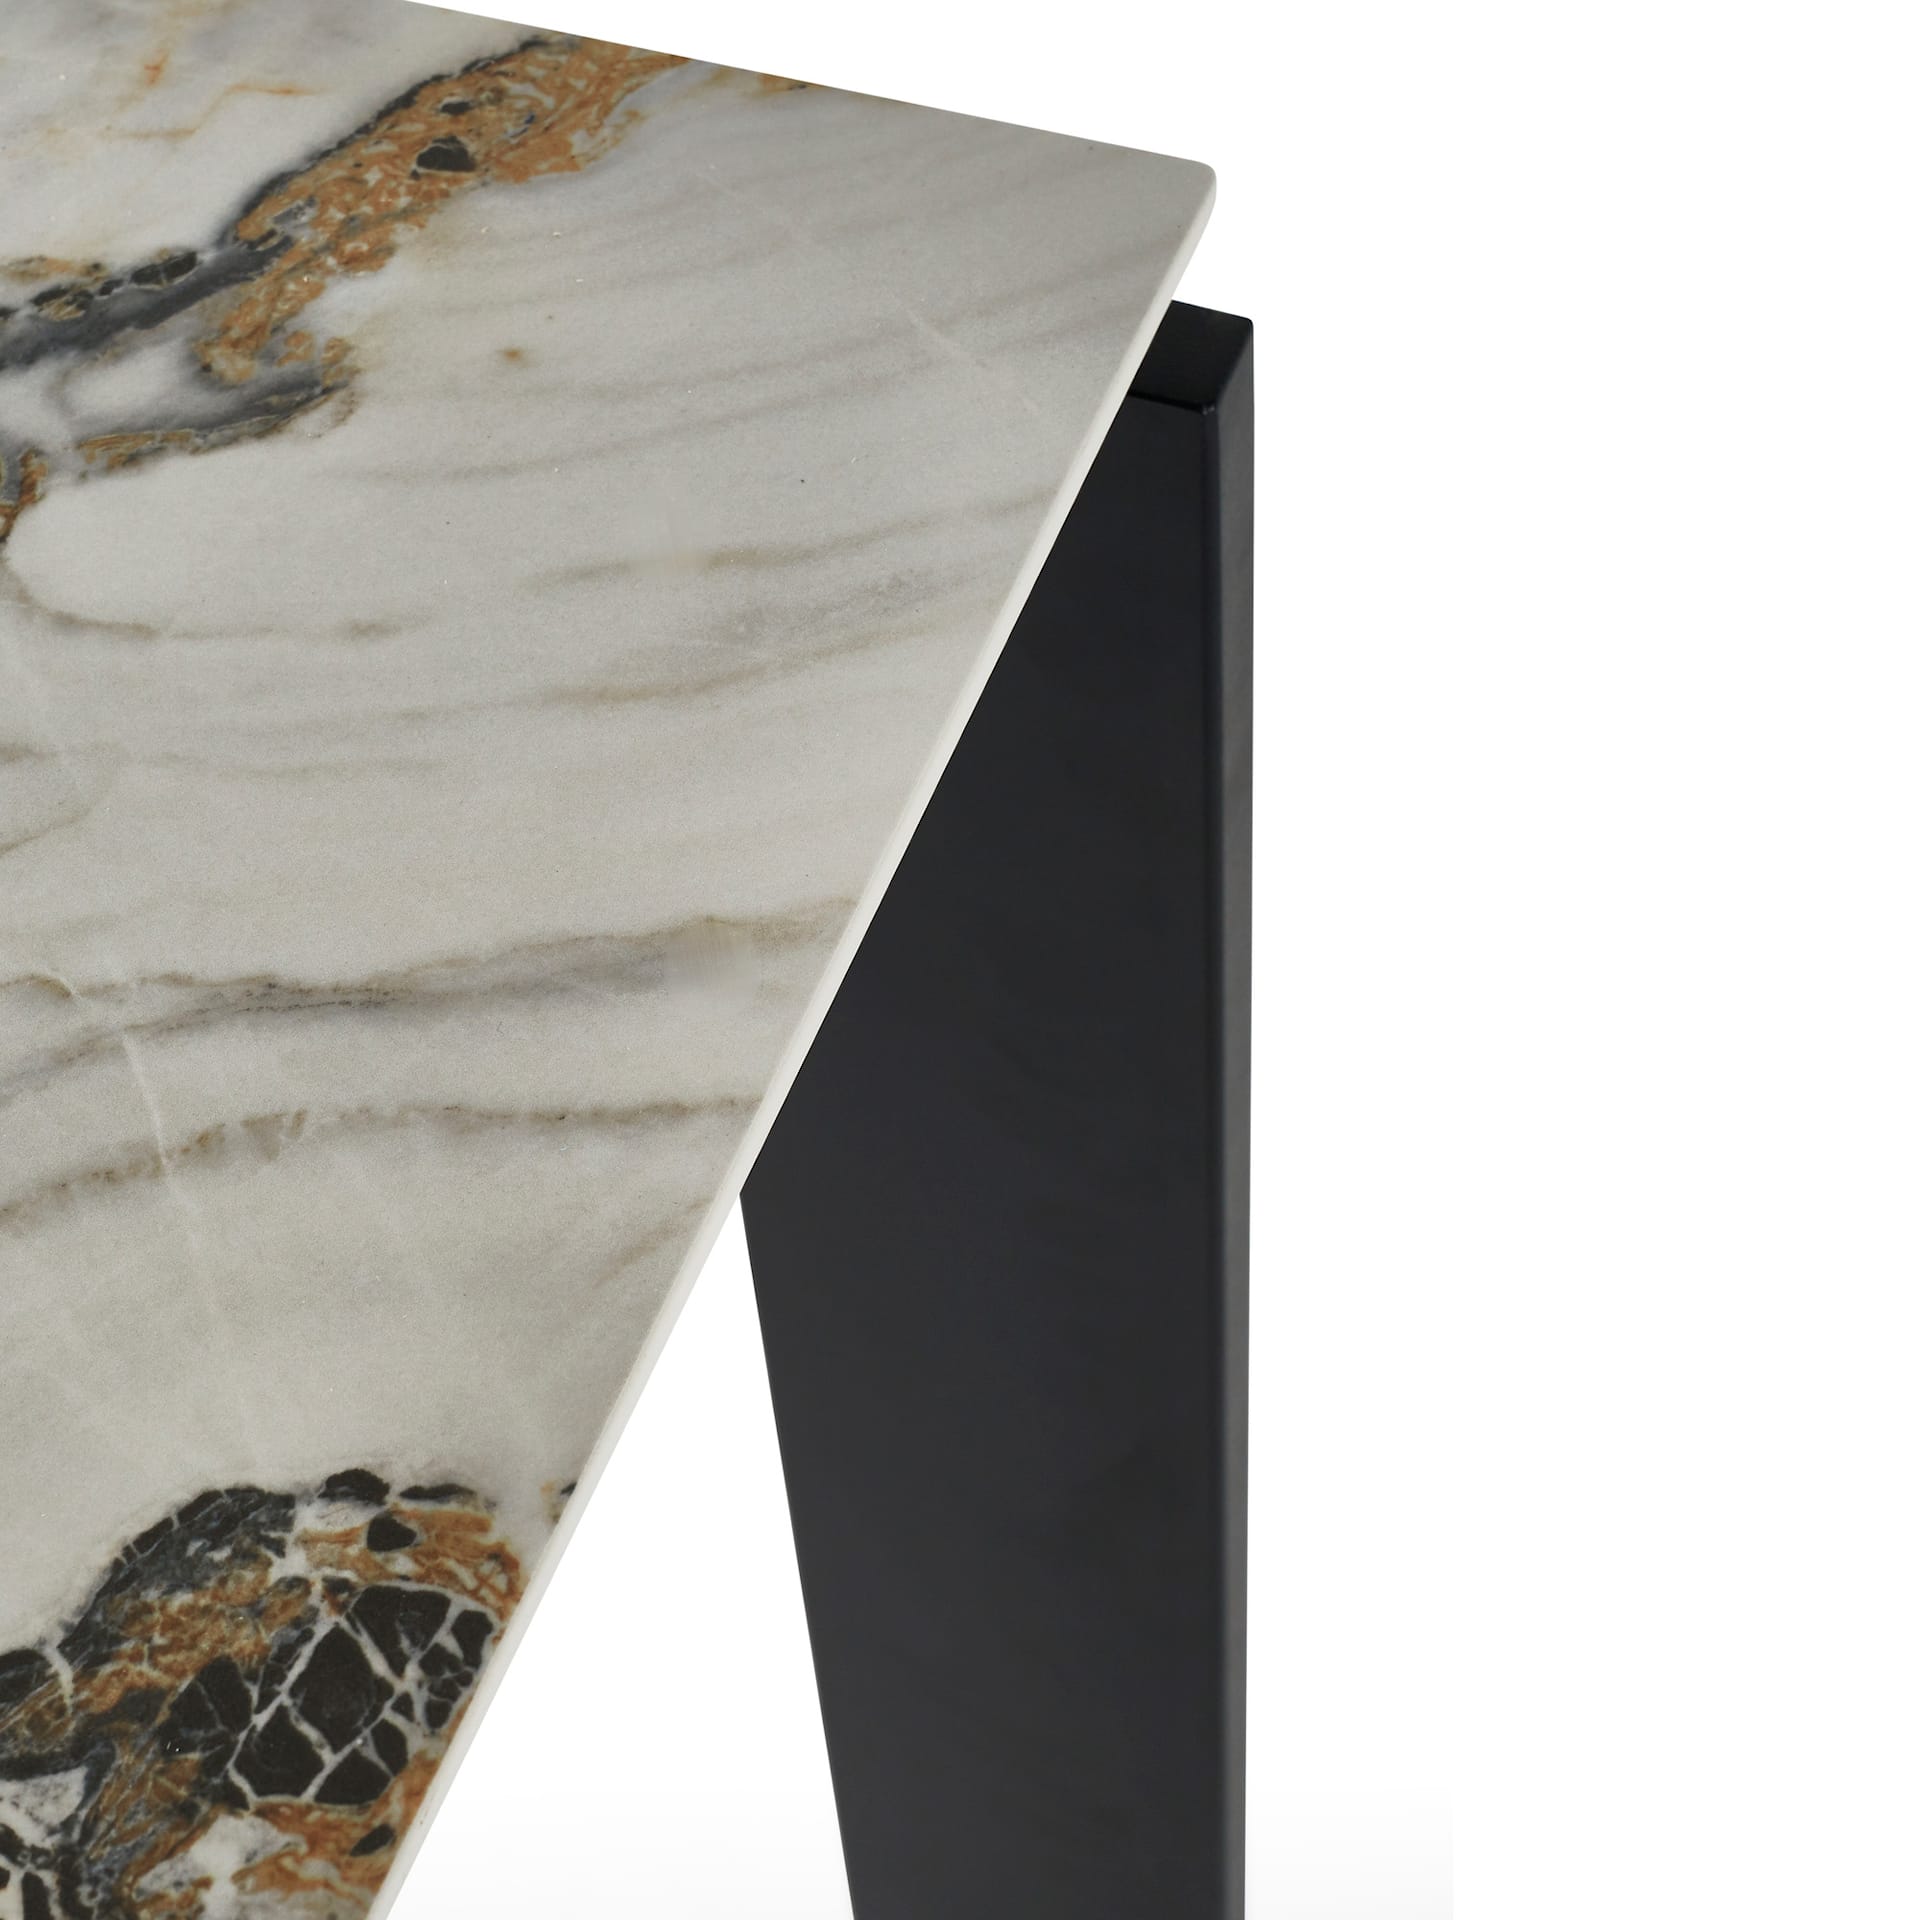 Four Table - Marble finish 190x79 - Kartell - NO GA